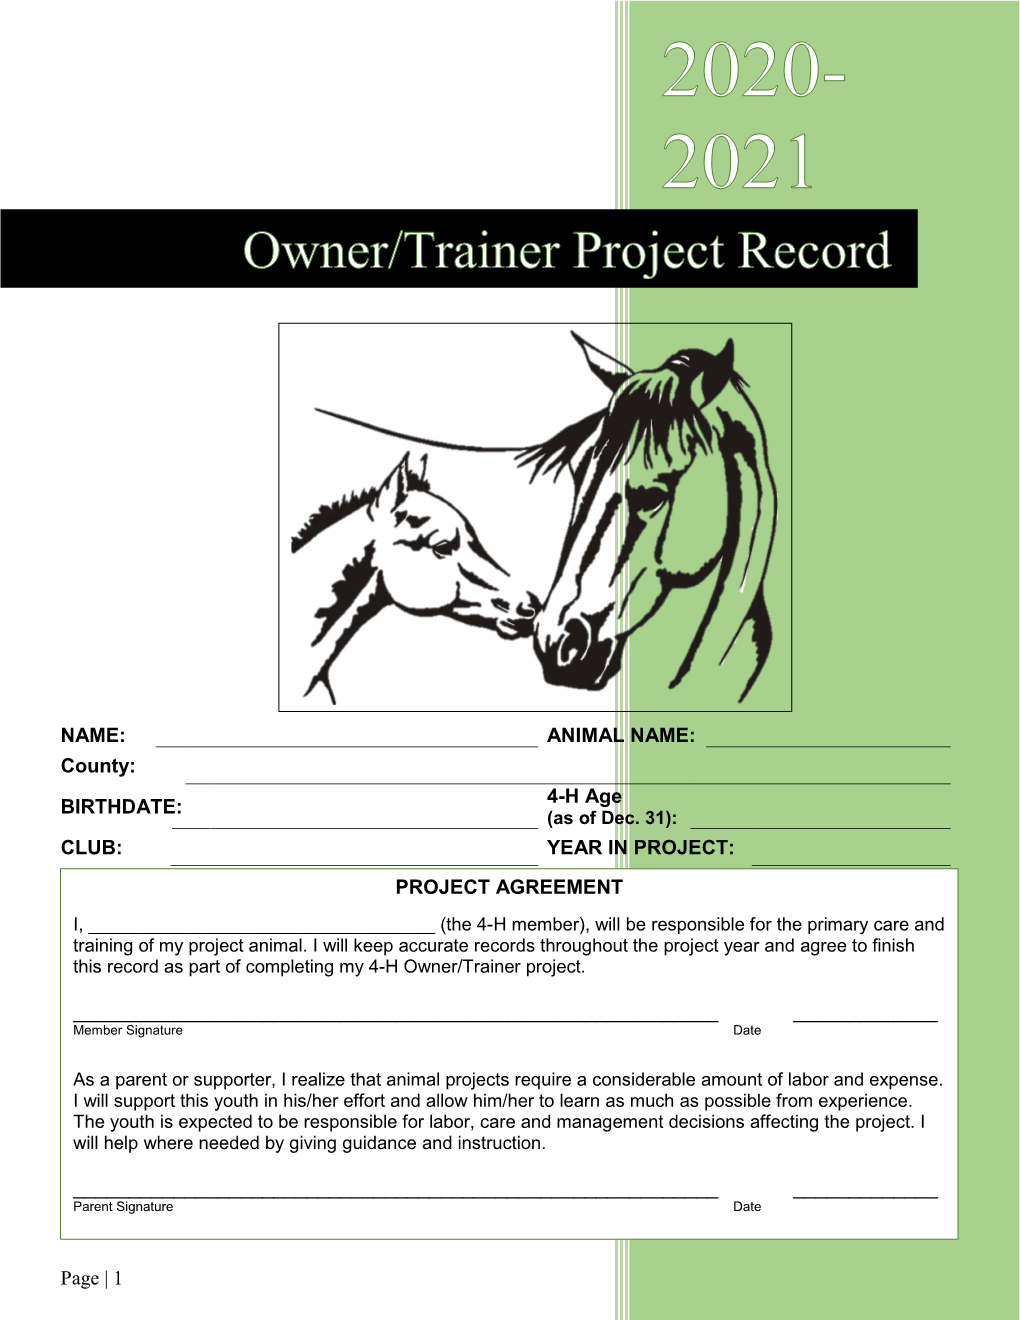 Owner/Trainer Project Record